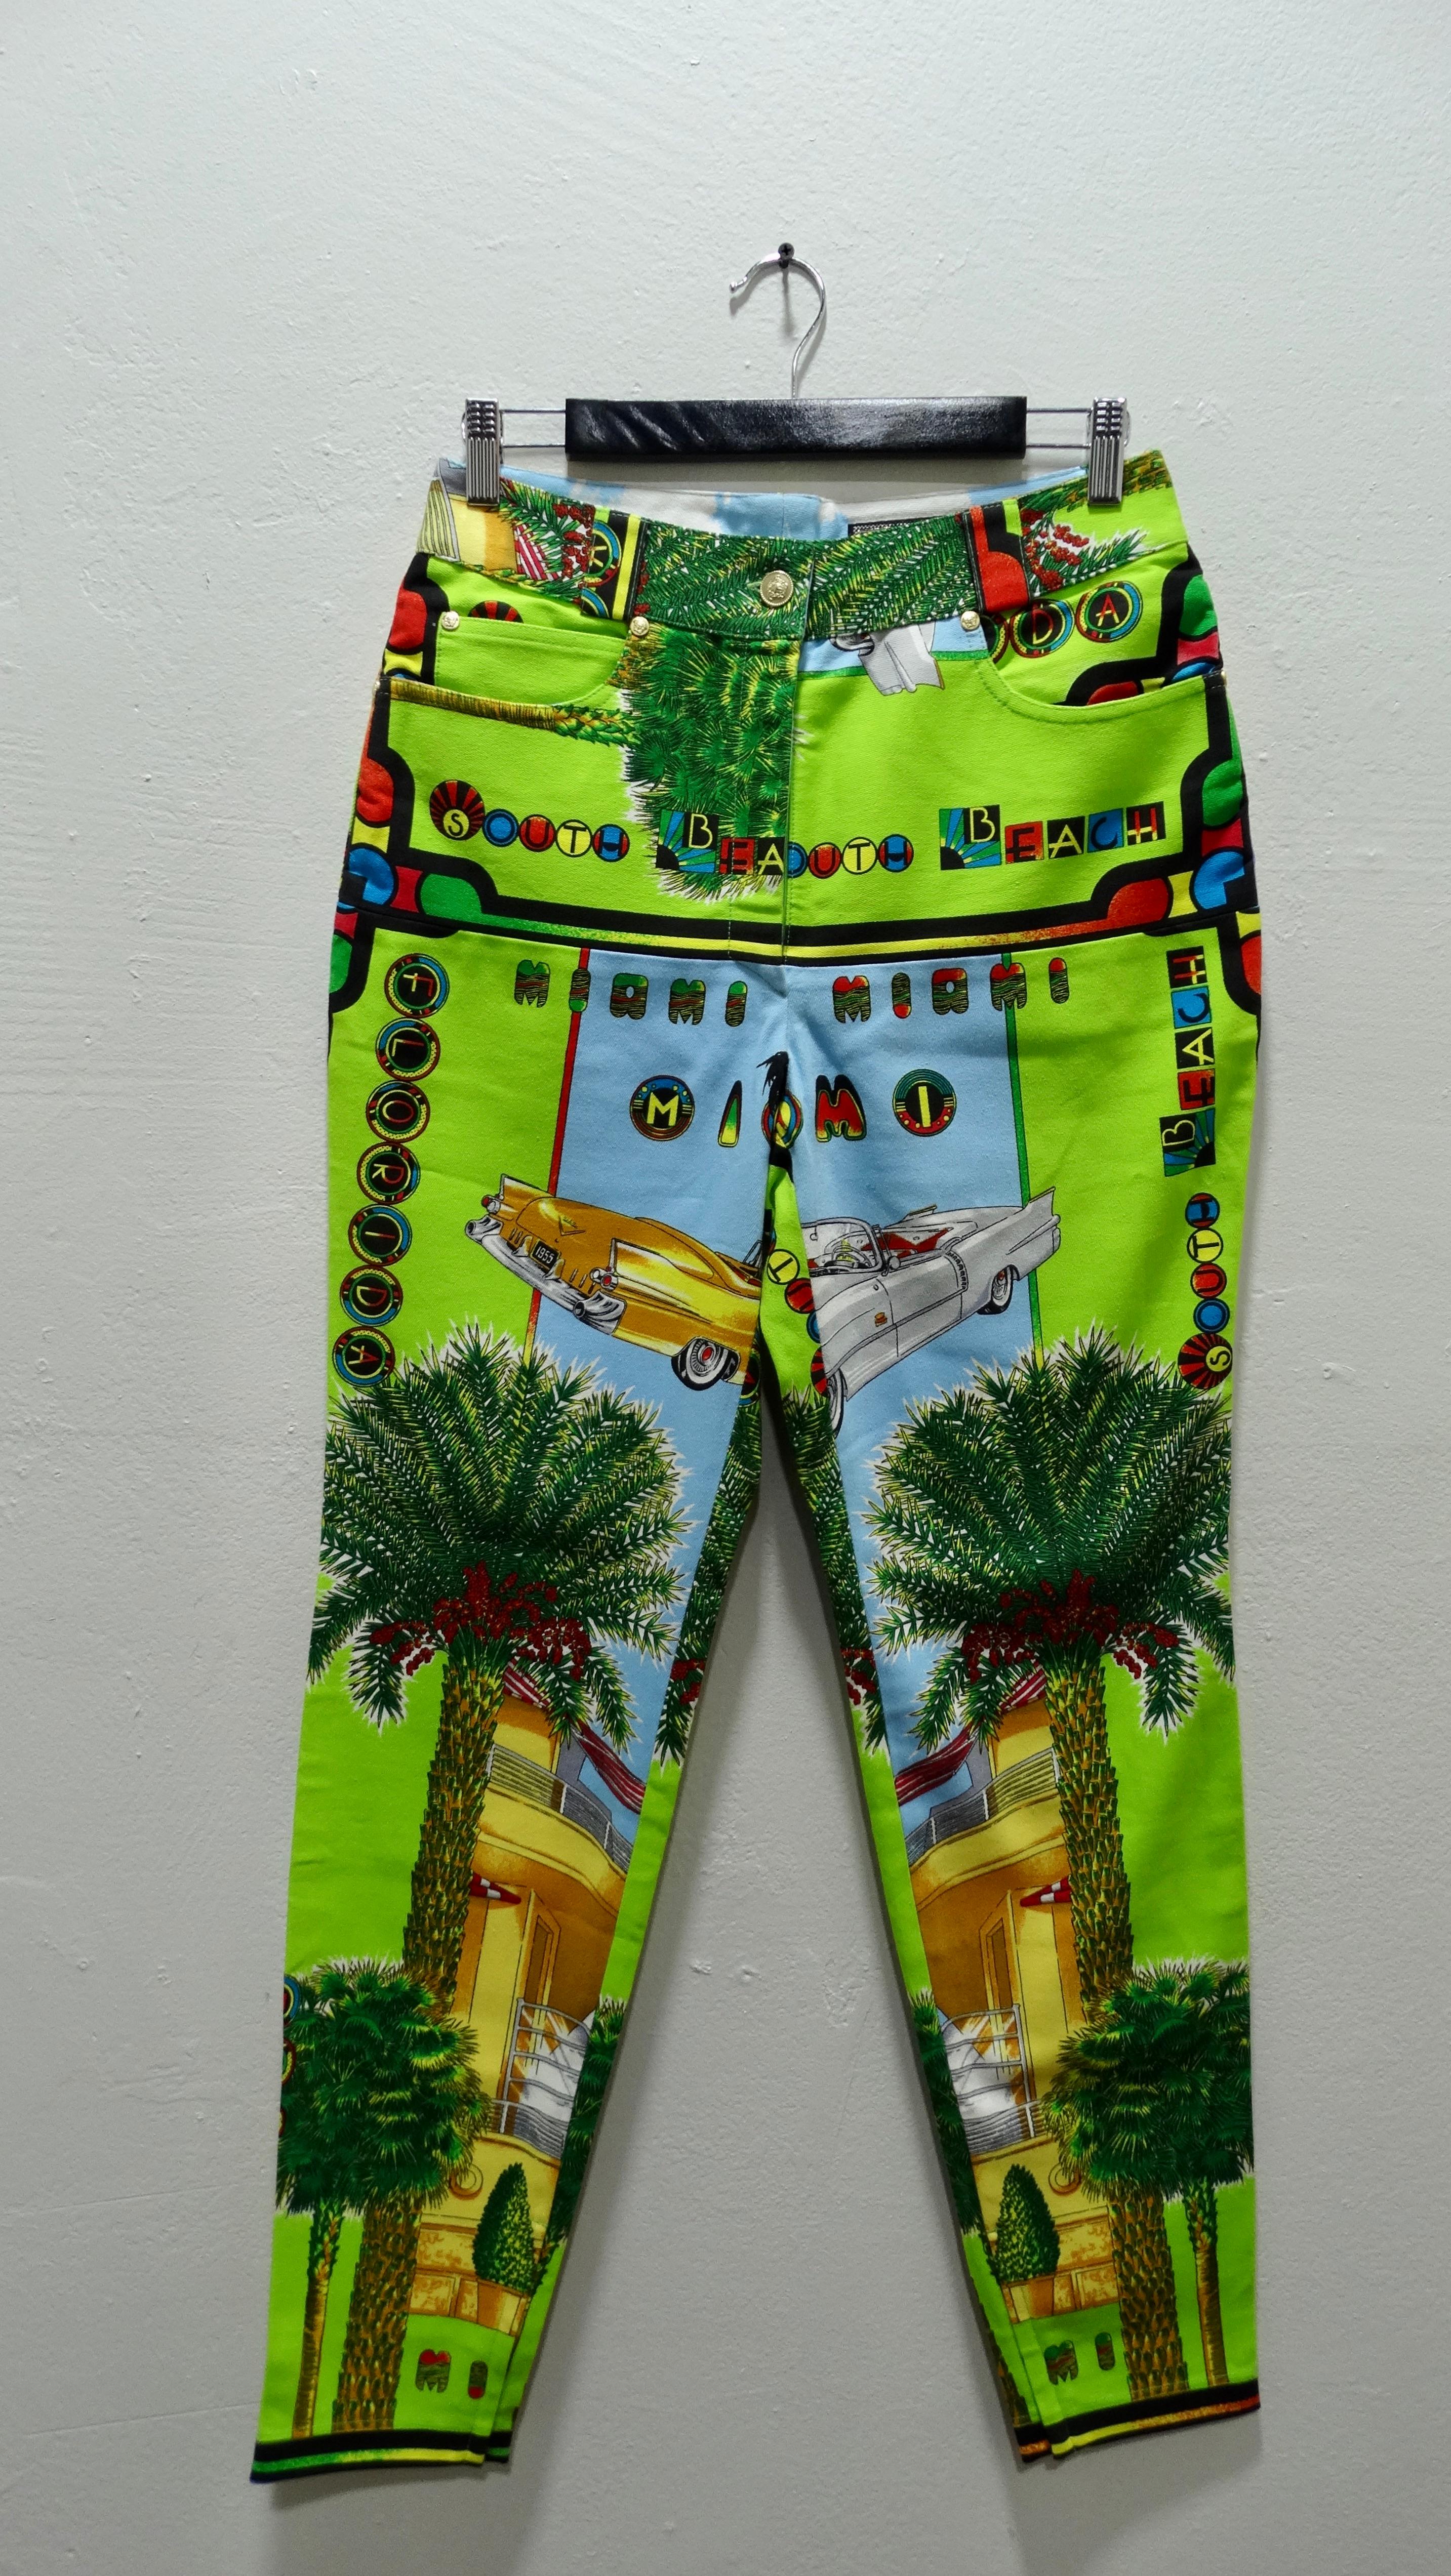 Feel that Miami heat in these show stopping jeans by Gianni Versace Couture! Circa 1990s, these statement pants will surely turn heads and be the perfect addition to your wardrobe this summer! This print features neon colors and iconic Miami emblems